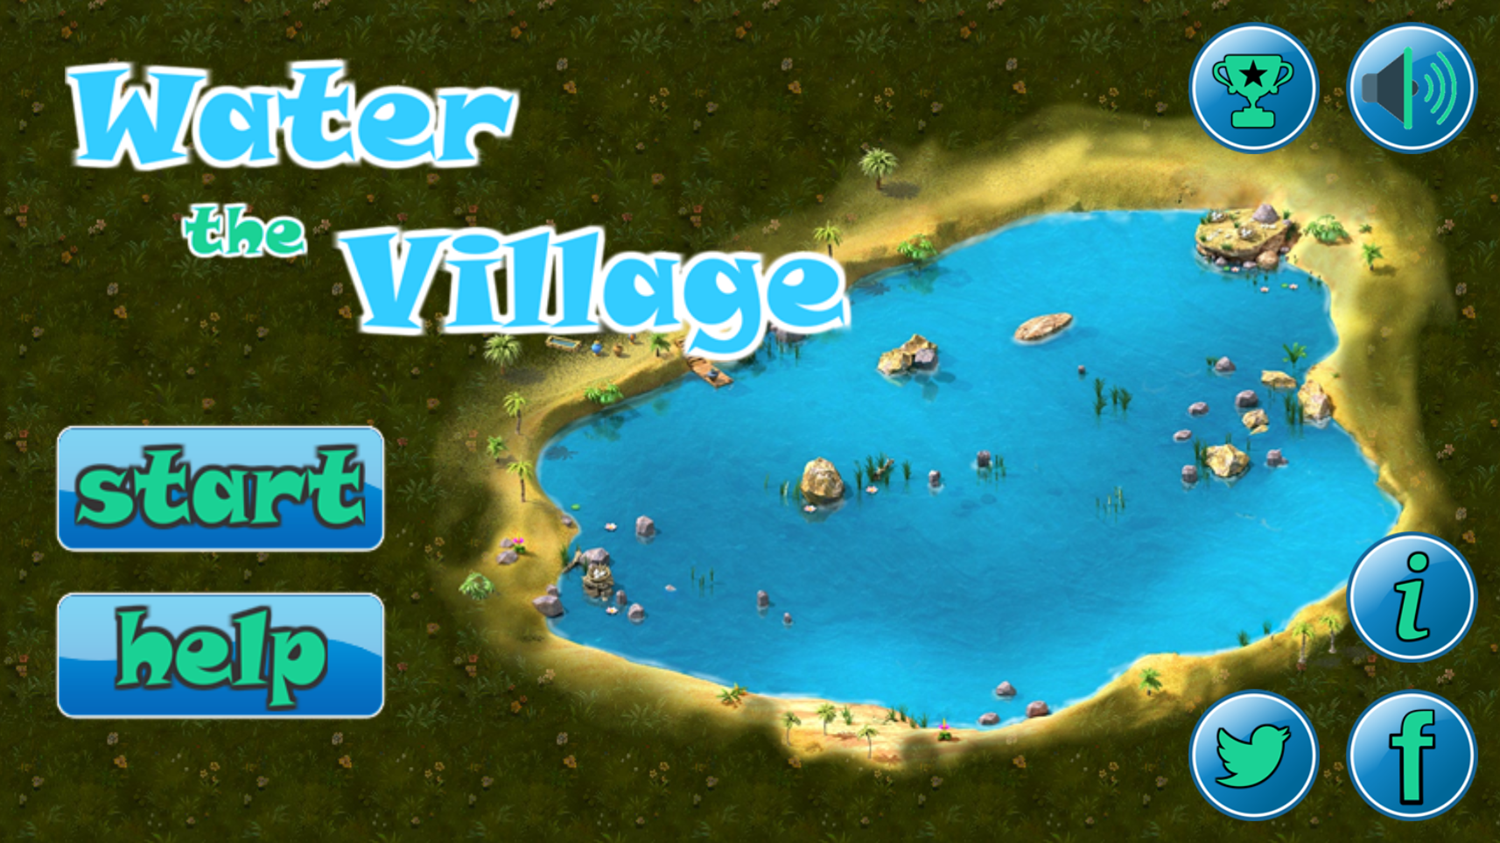 Water the Village Game Welcome Screen Screenshot.